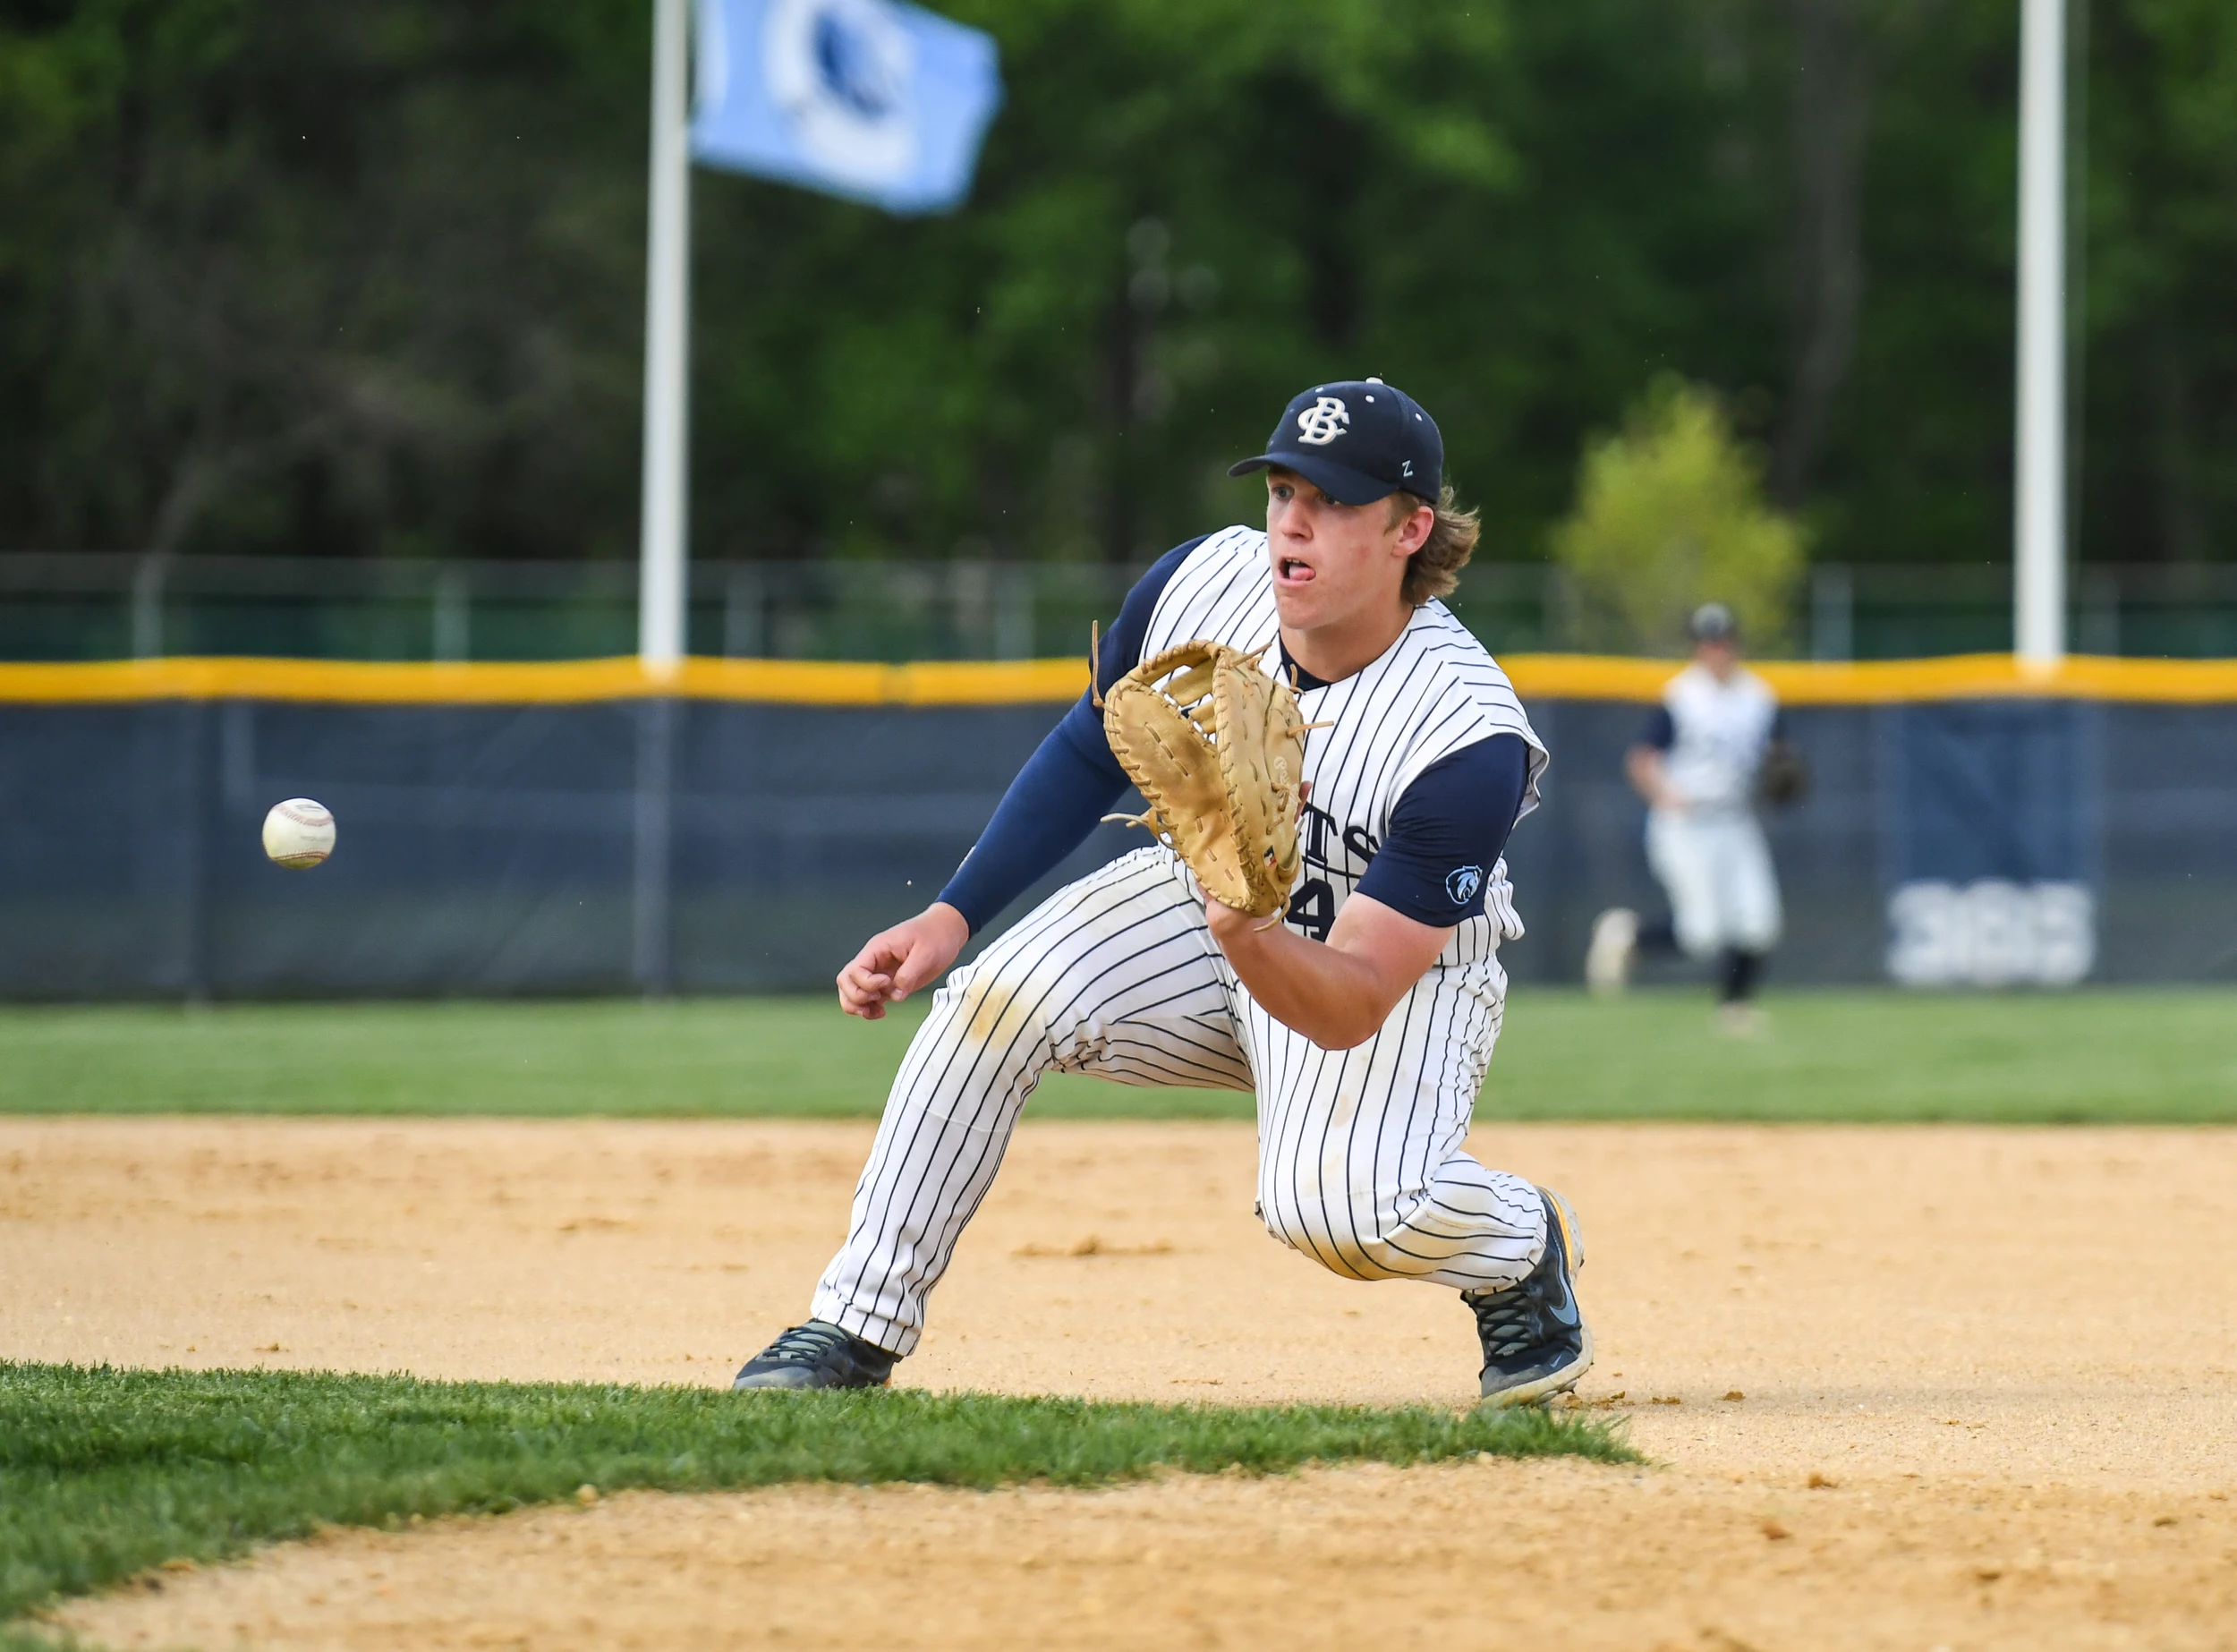 Lawrence baseball shuts out Colts Neck to win its CJ III opener